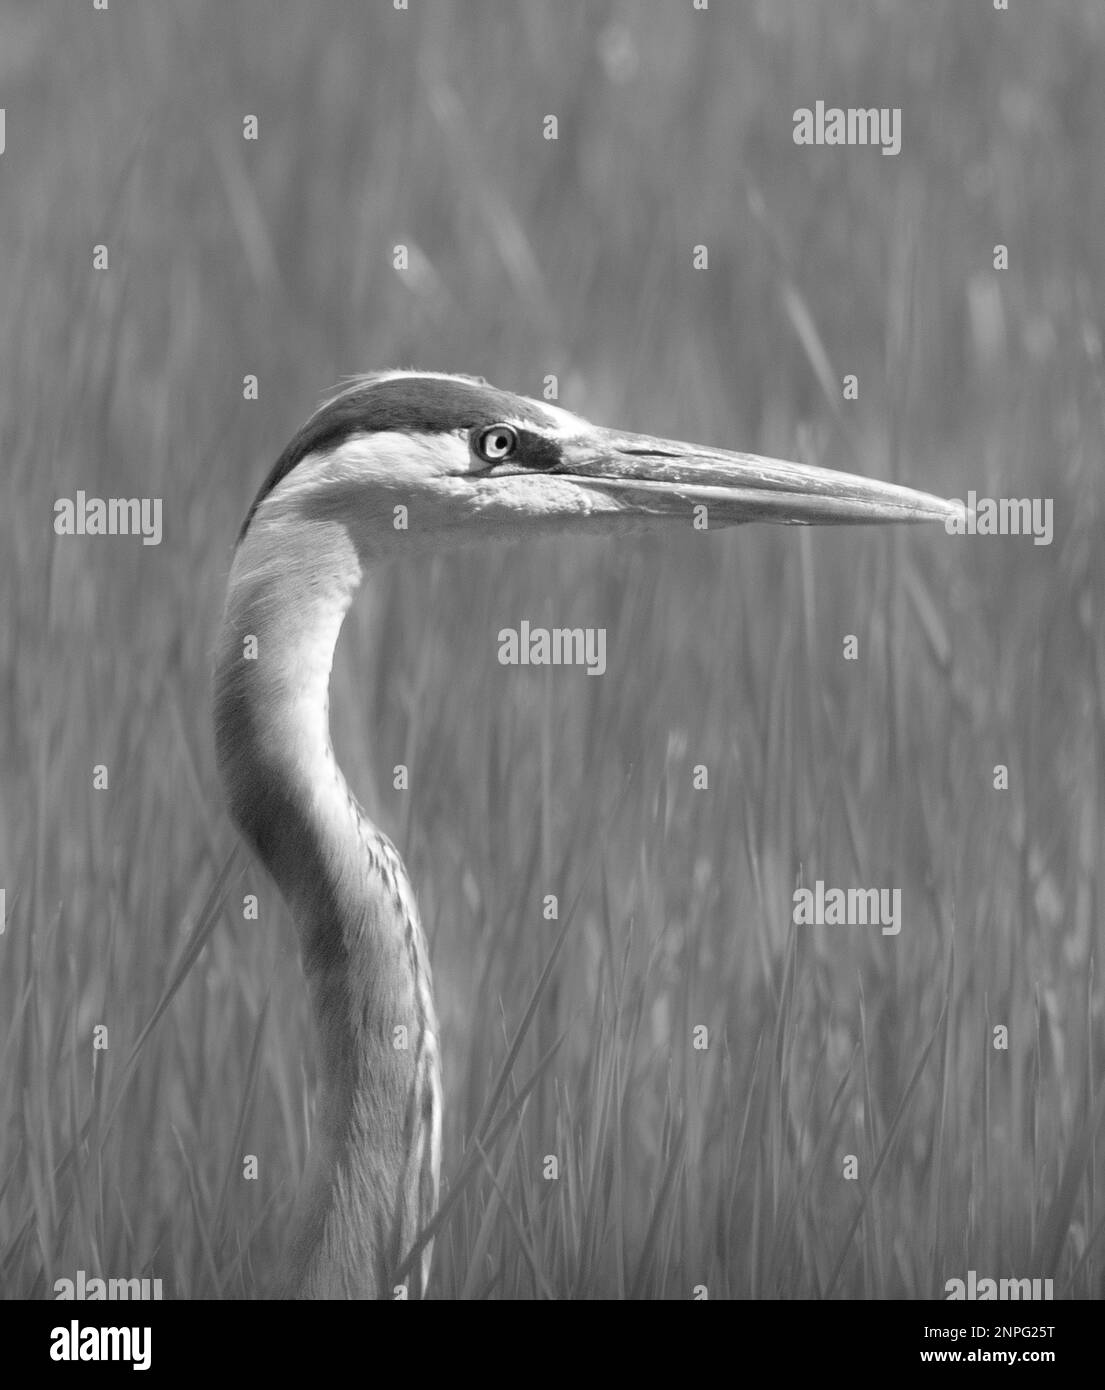 Black and white closeup photo of Great Blue Heron in grassy marsh Stock Photo